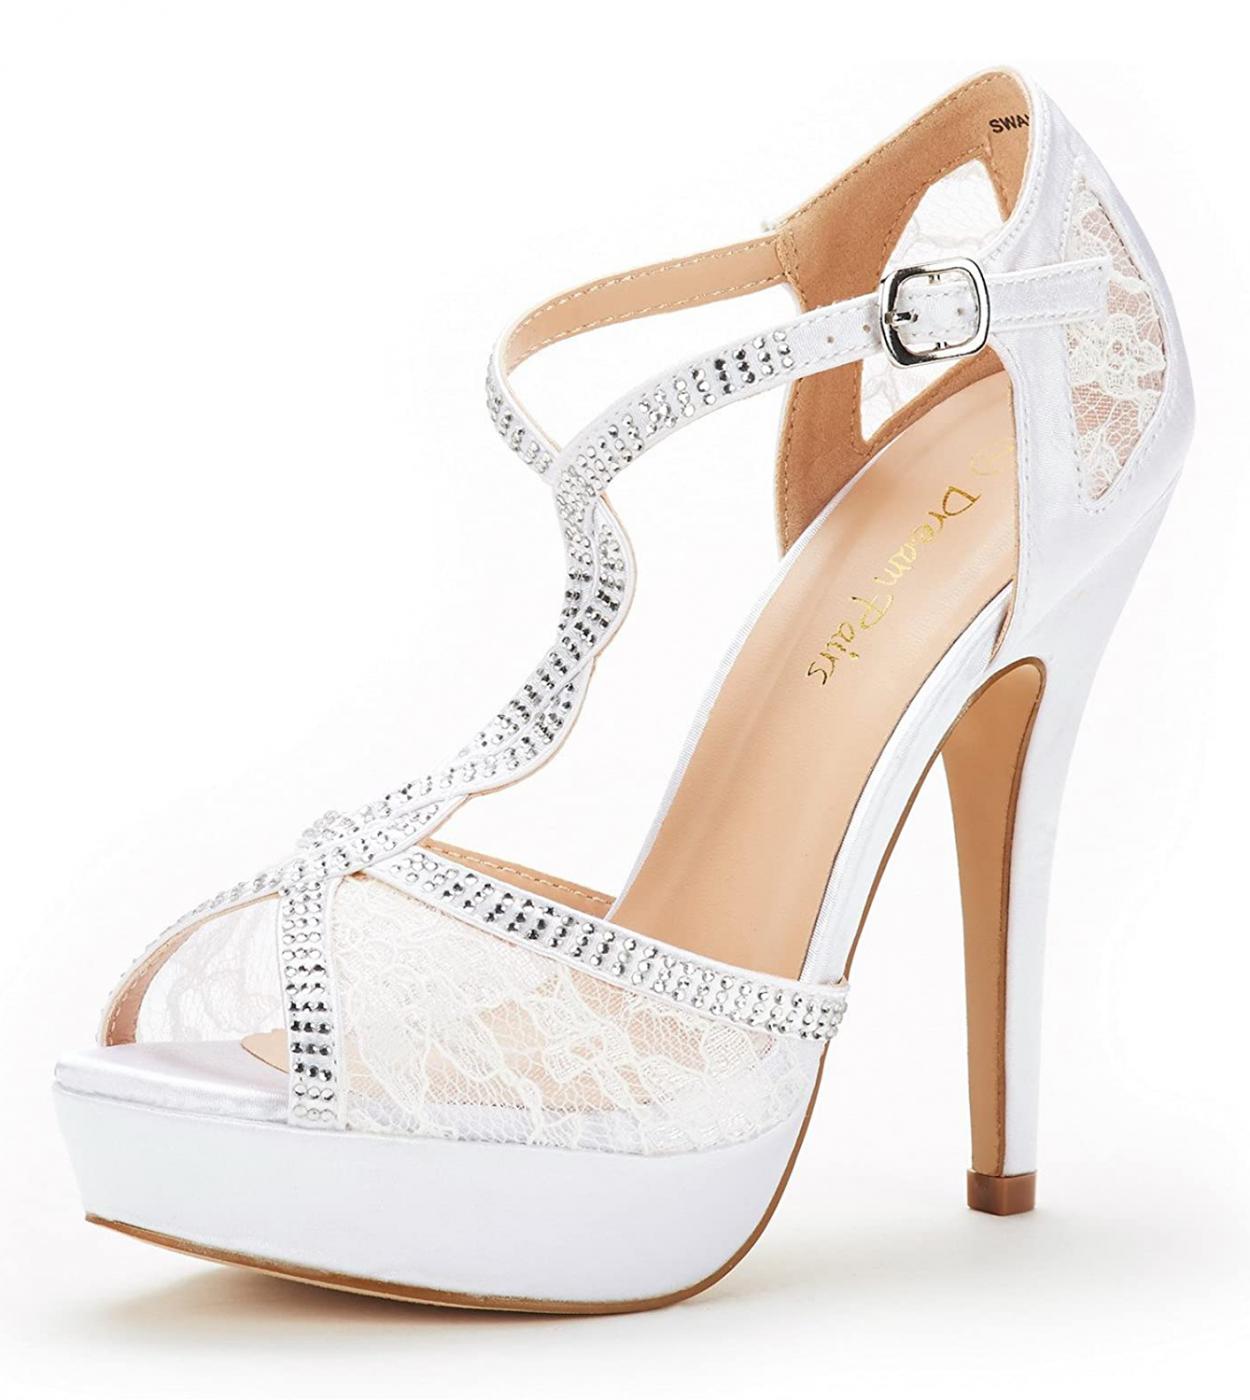 Dream Pairs Womens Heeled Sandal Pumps Peep Toe Super High Heel Platform Sandals For Woman White Lace Wedding Party Sho